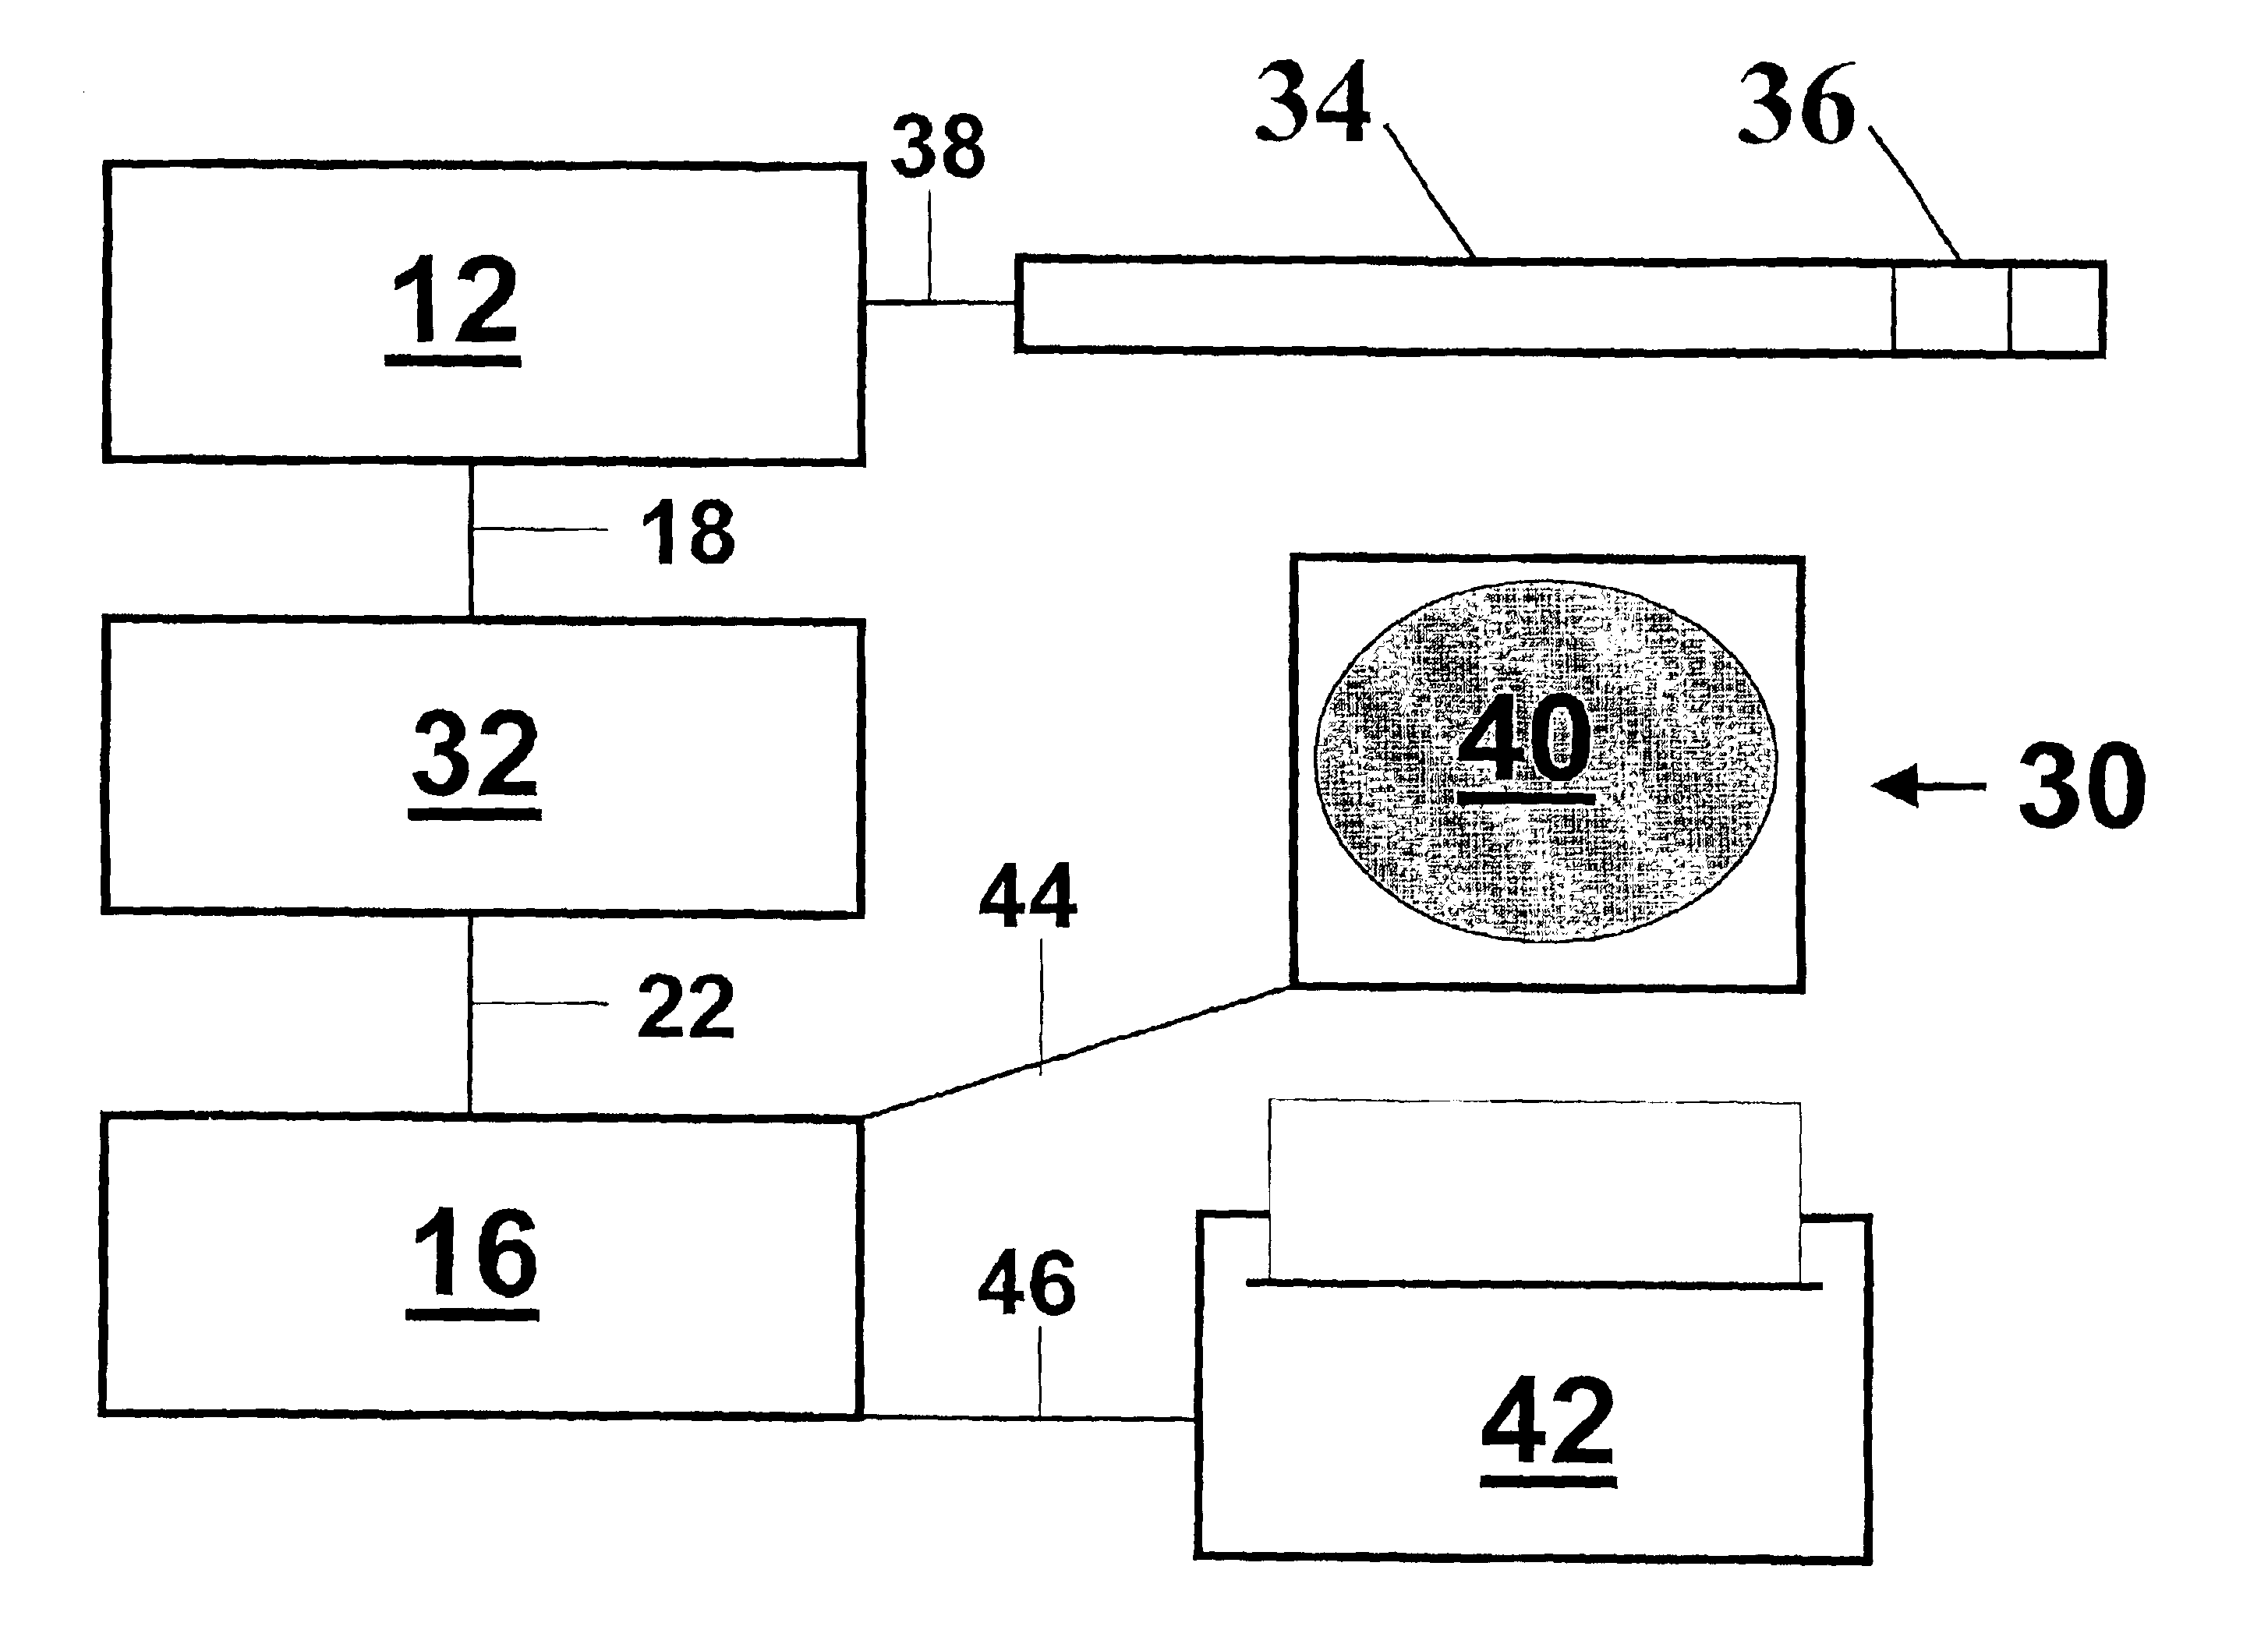 System and methods for imaging within a body lumen